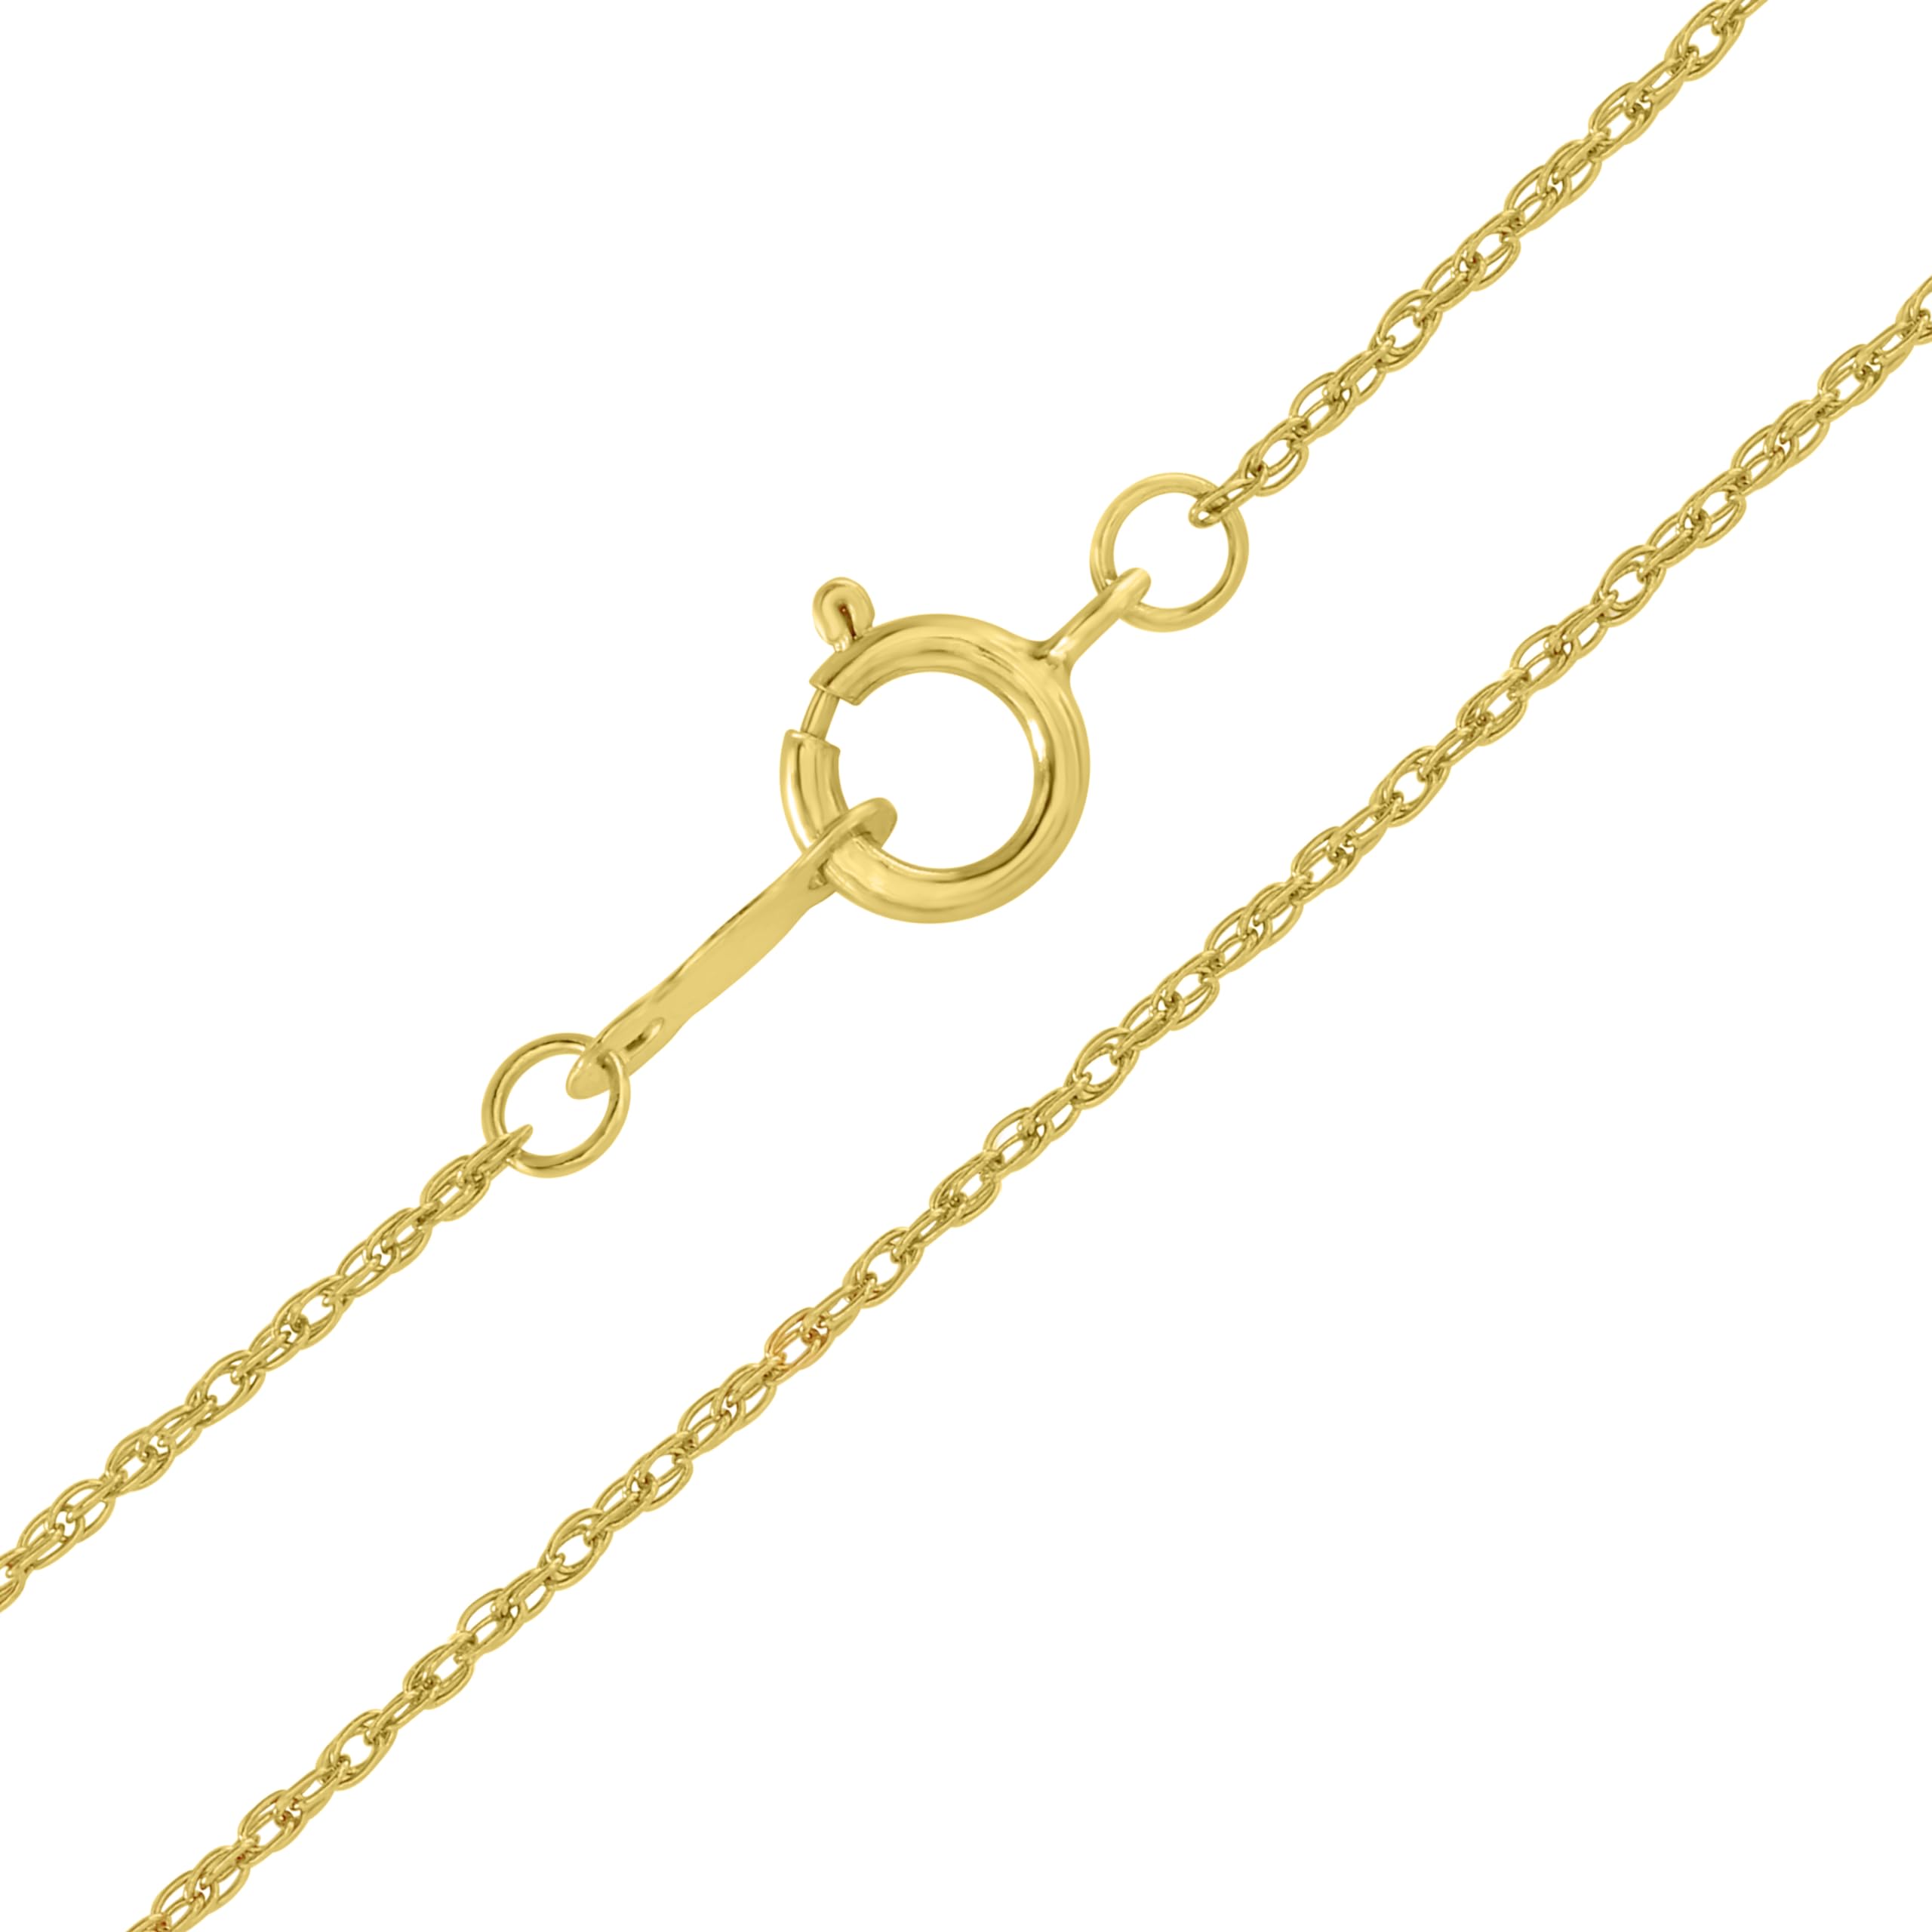 GILDED 10K YELLOW GOLD 1/4 CTTW DIAMOND TWIST CROSS NECKLACE WITH 18 INCH ROPE CHAIN.